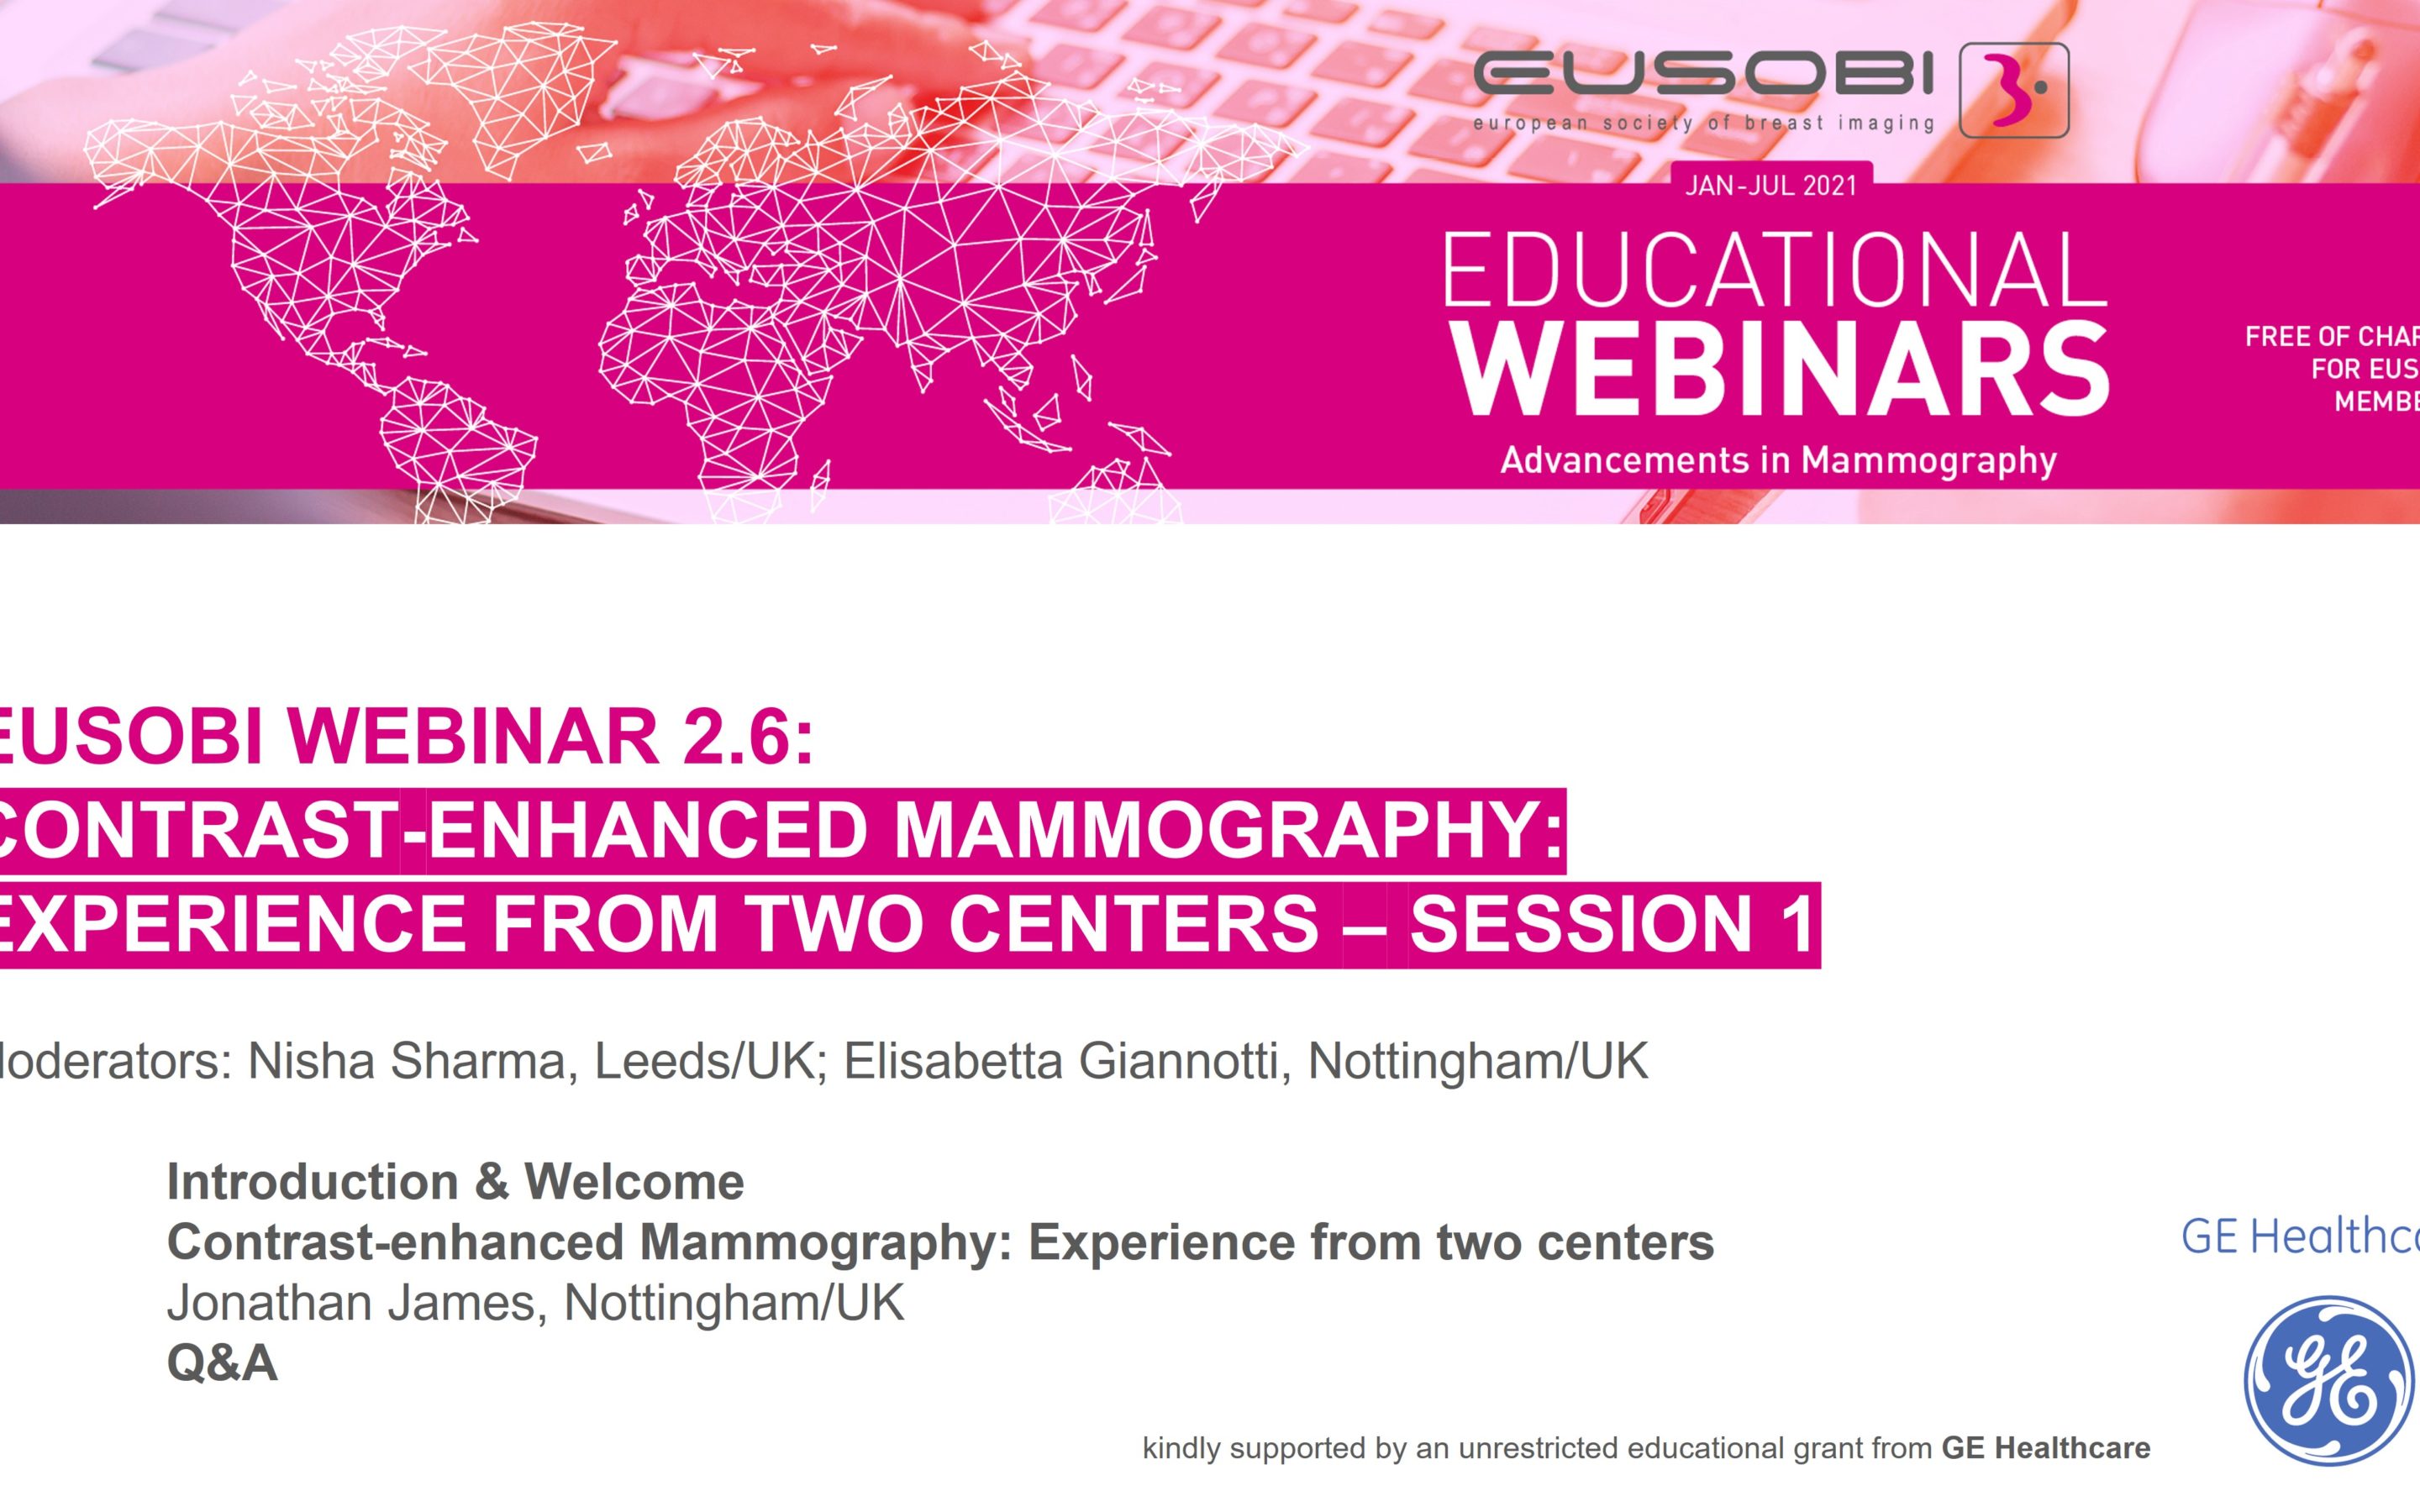 2.6 / Contrast-enhanced Mammography: Experience from two centers (Session 1)